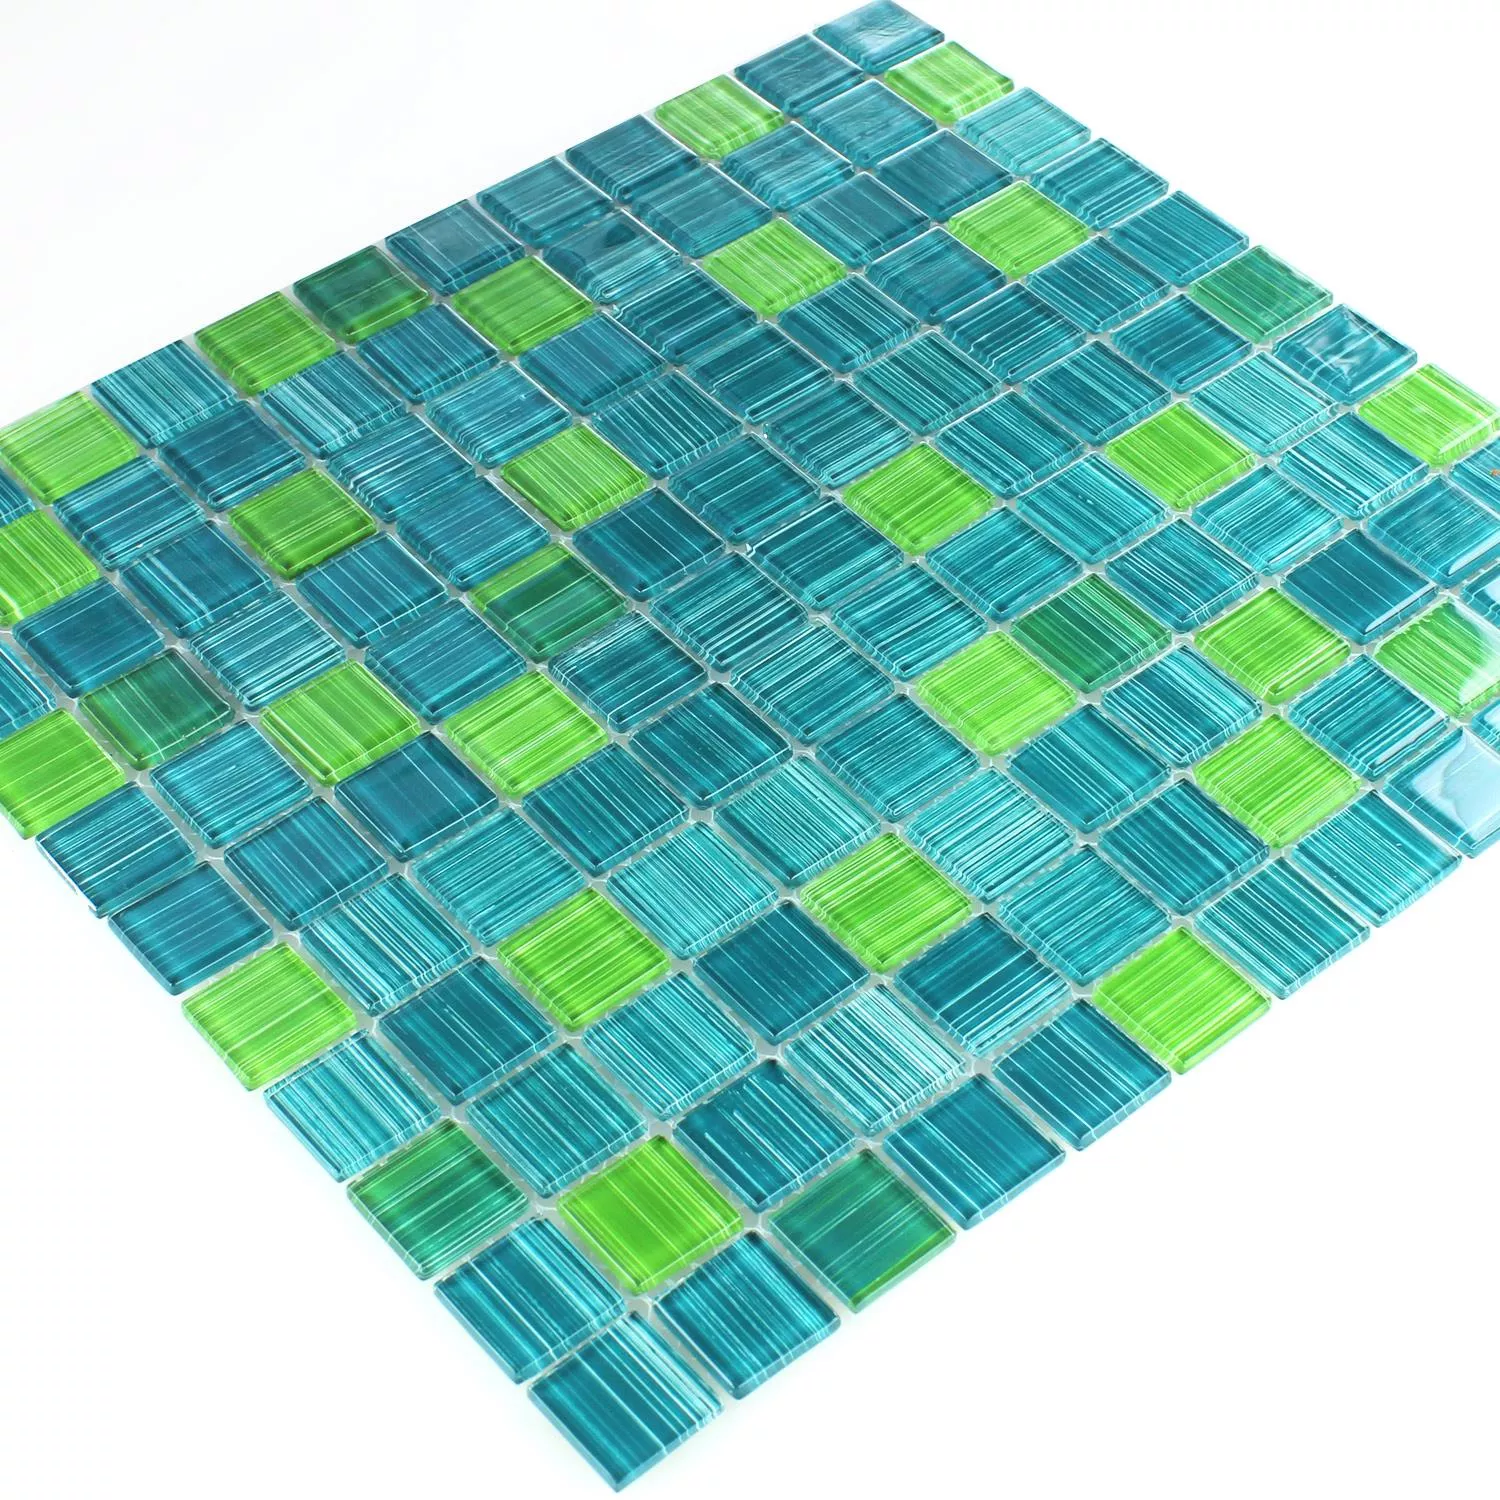 Sample Striped Crystal Mosaic Tiles Glass Green Mix